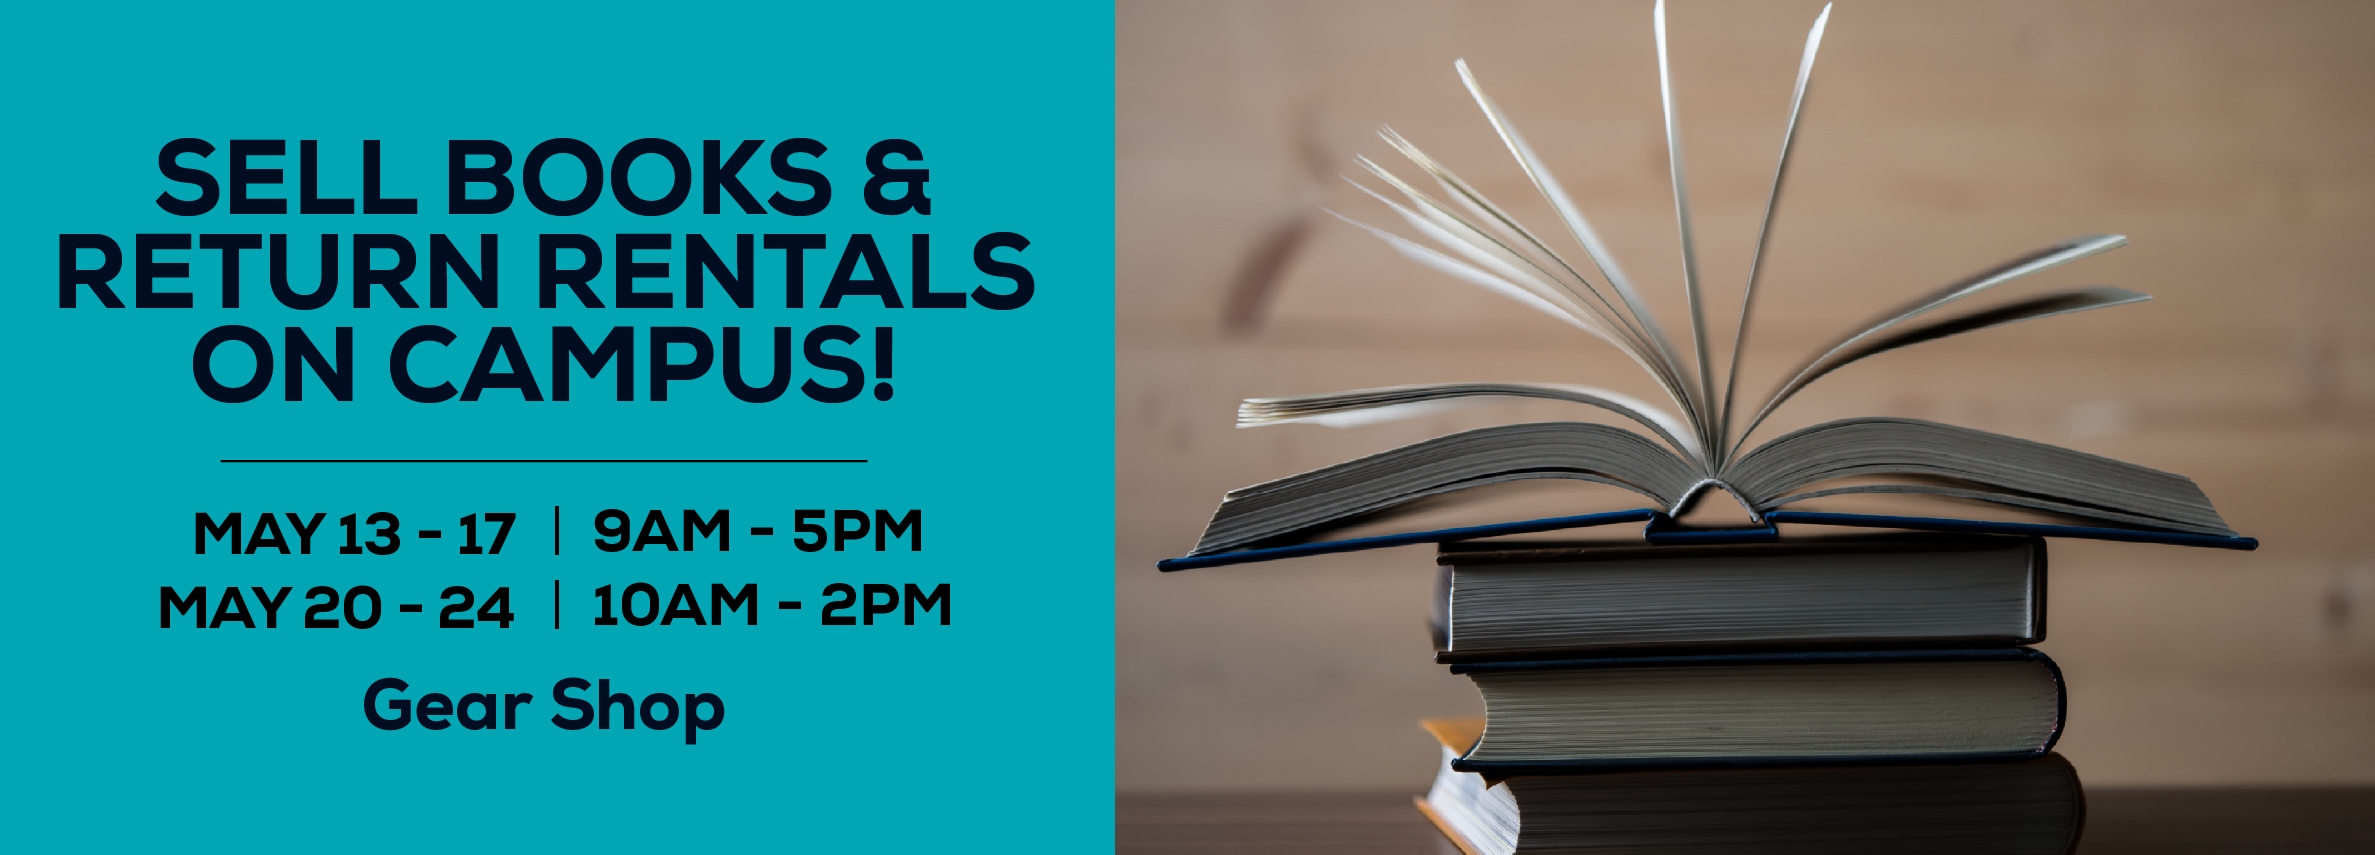 Sell Books & Return Rentals On Campus! May 13 - 17, 9am to 5pm. May 20 - 24, 10am to 2pm at the Gear Shop.